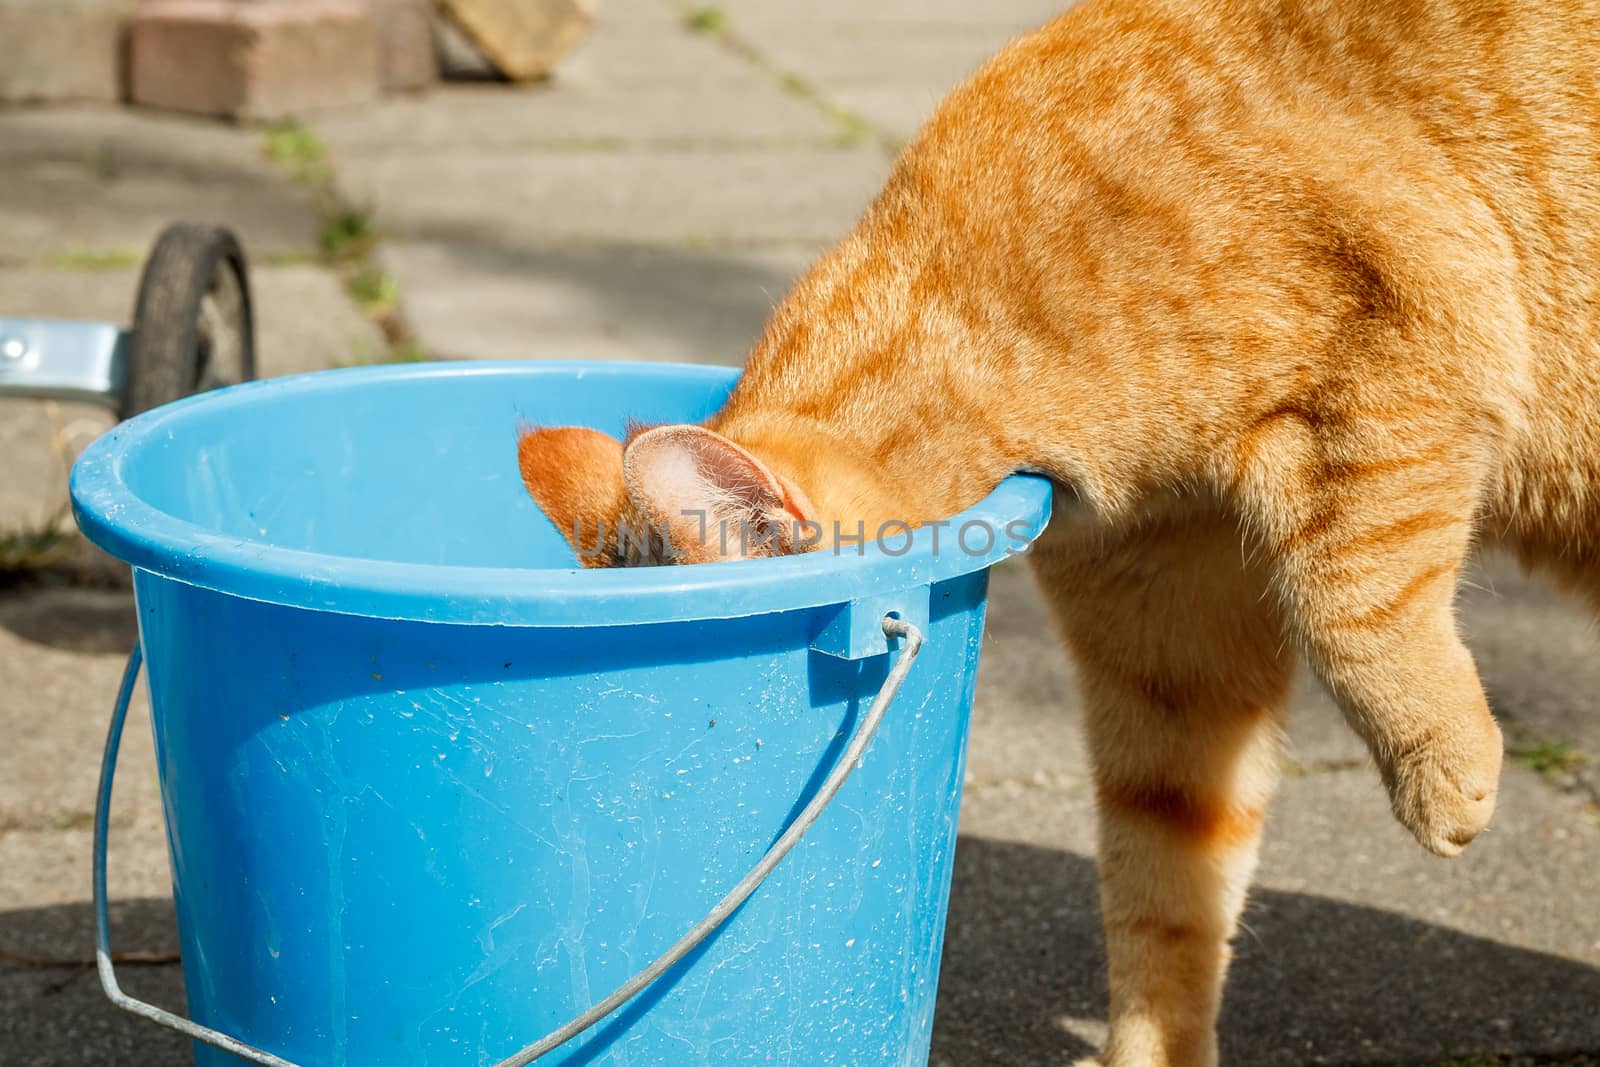 Amazing how cats go about getting water wherever they can